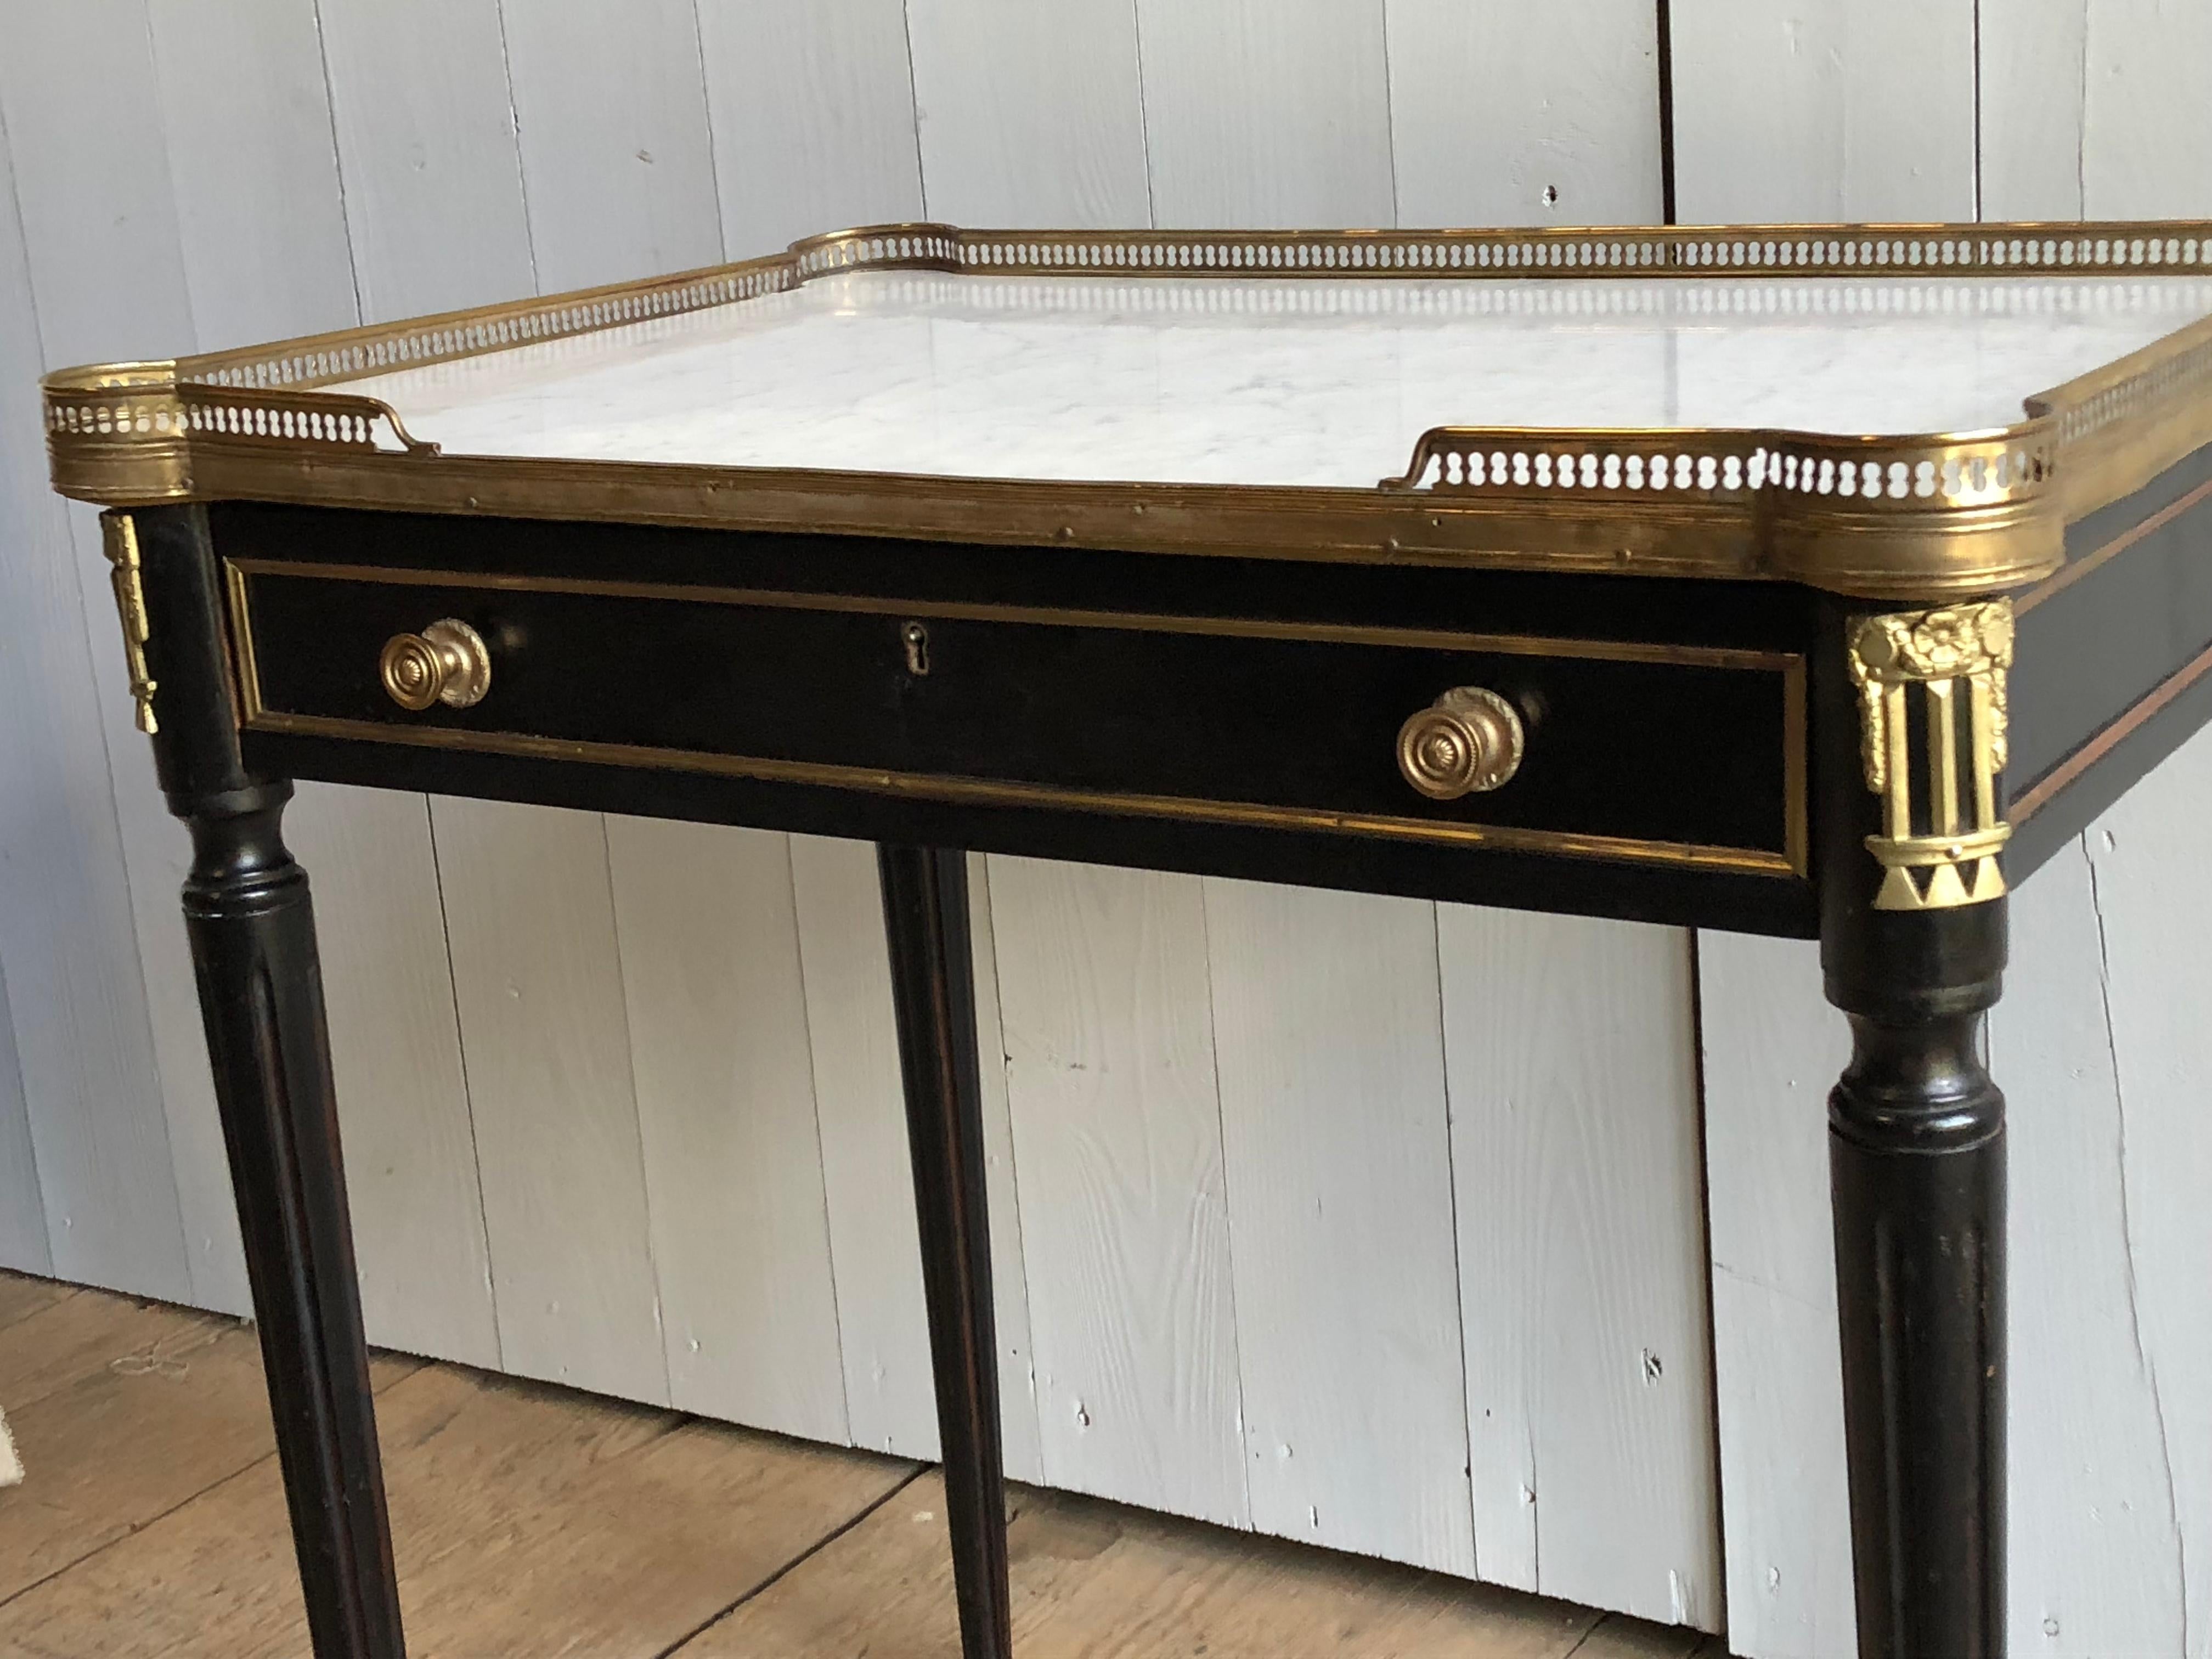 A French Directoire style writing or side table in black lacquer with a white marble top and brass mounts including a reticulated brass gallery, brass trim and foot caps, circa 1940. One long drawer with brass pulls over tapered and fluted legs.